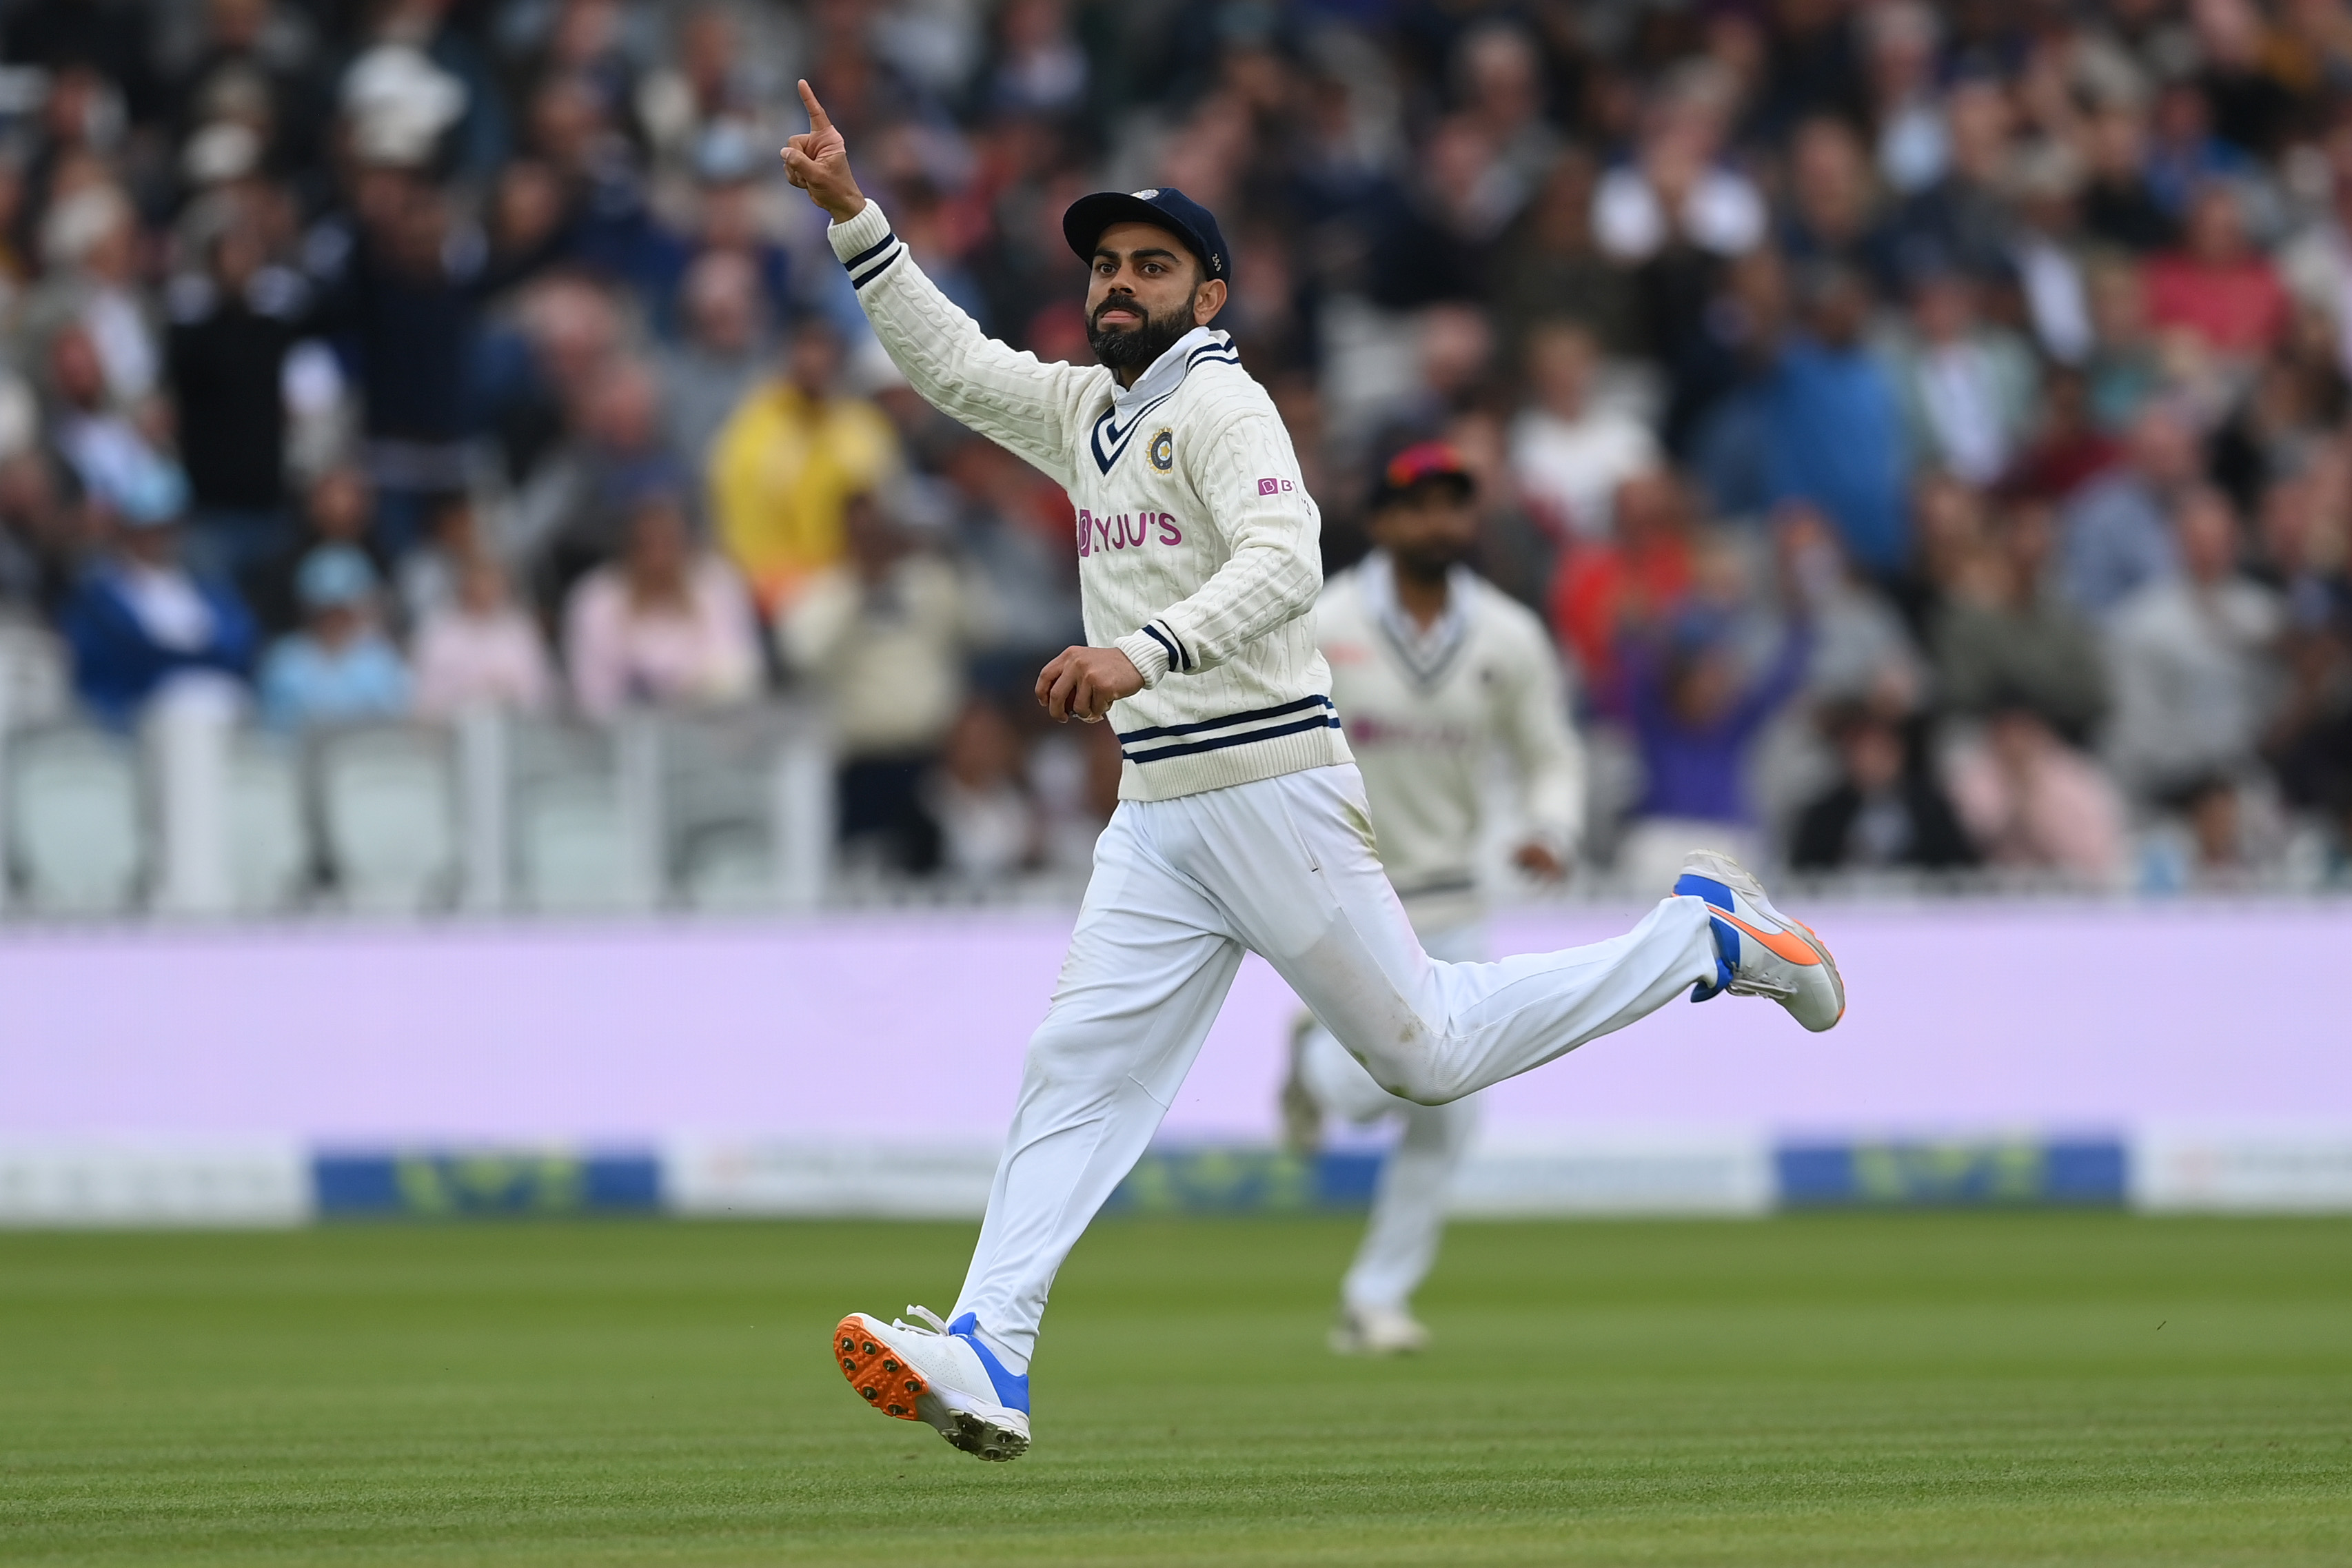 IND vs ENG | Virat Kohli wasn't wrong when he said India will be best Test team in world, recalls Allan Donald